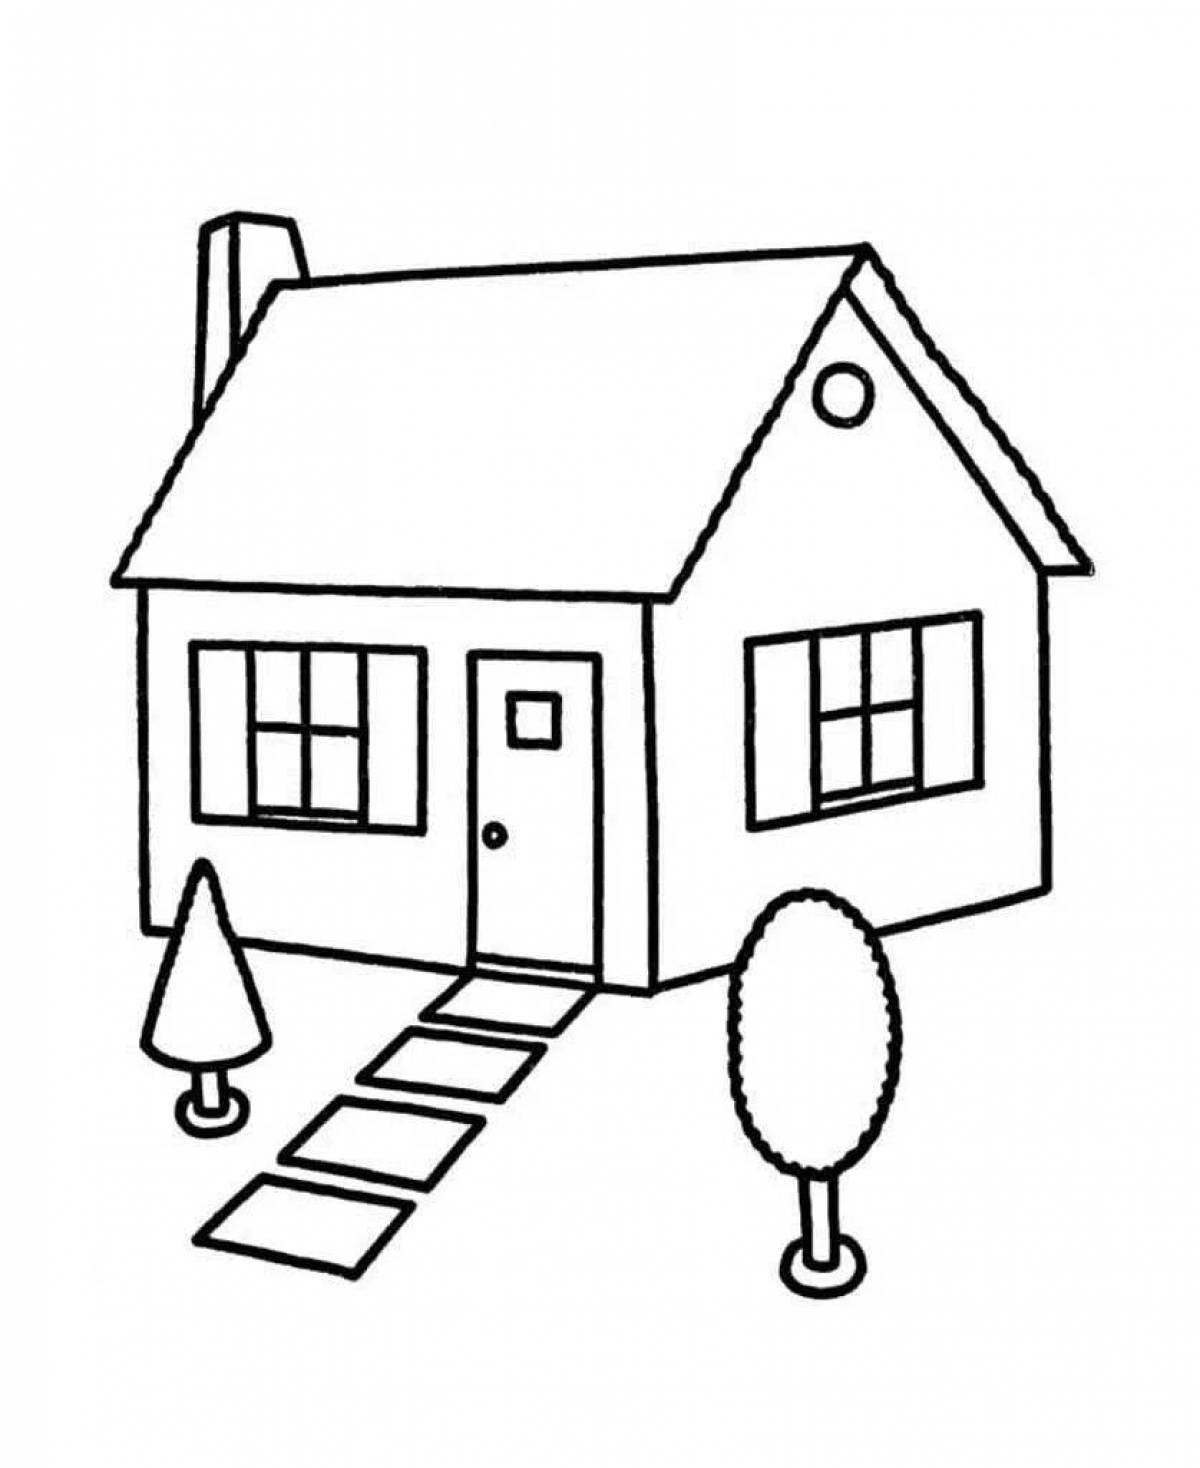 Cute simple house coloring for kids